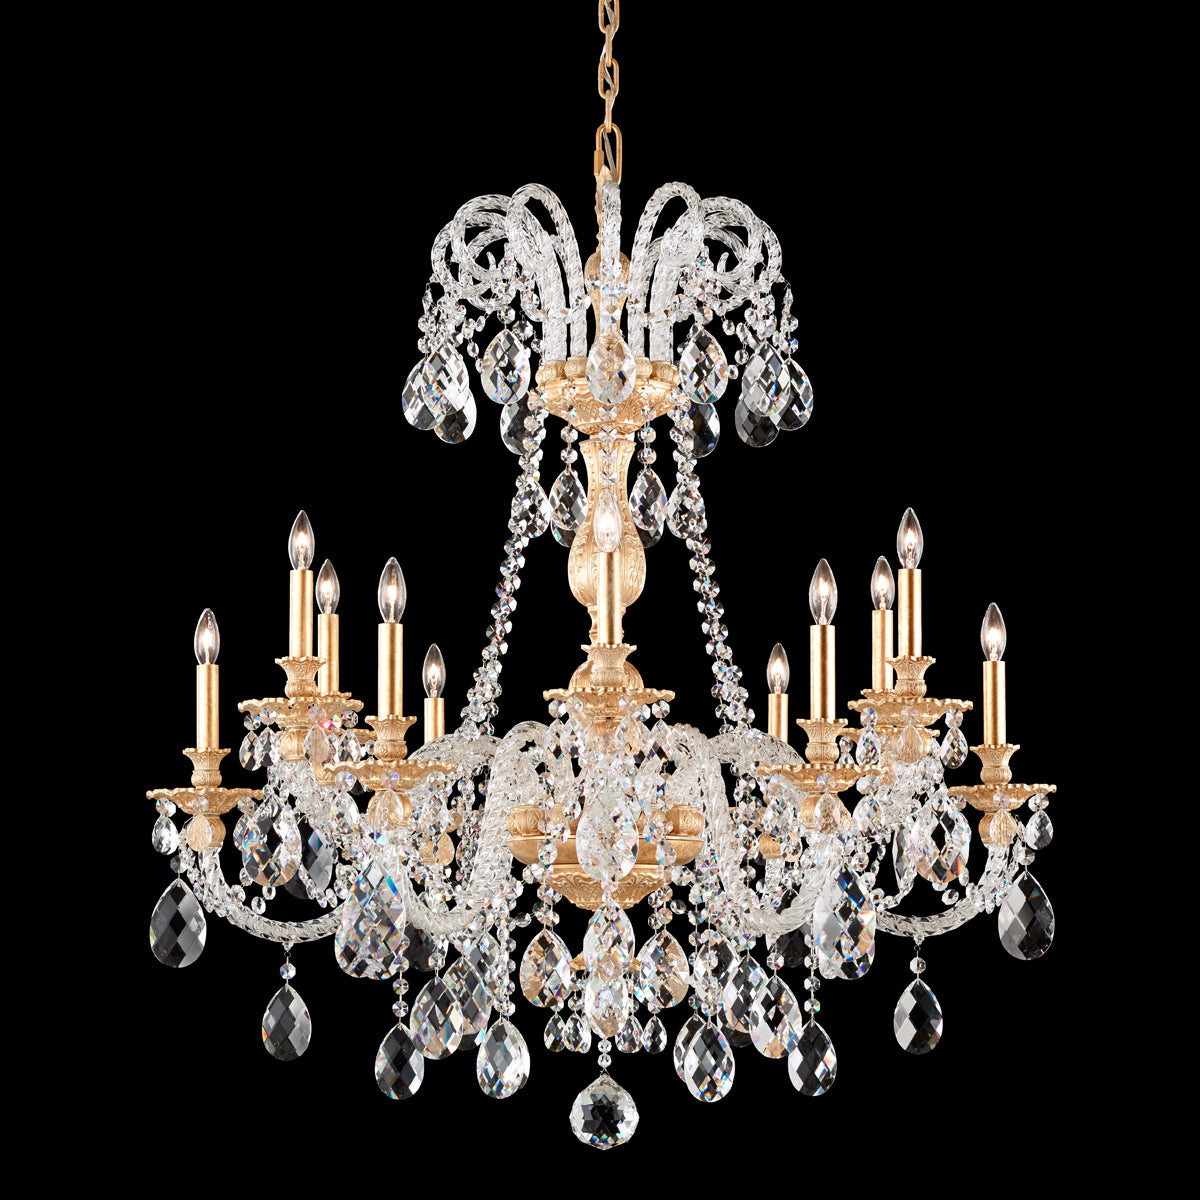 Isabelle 12-Light Chandelier in Florentine Bronze with Clear Spectra Crystals